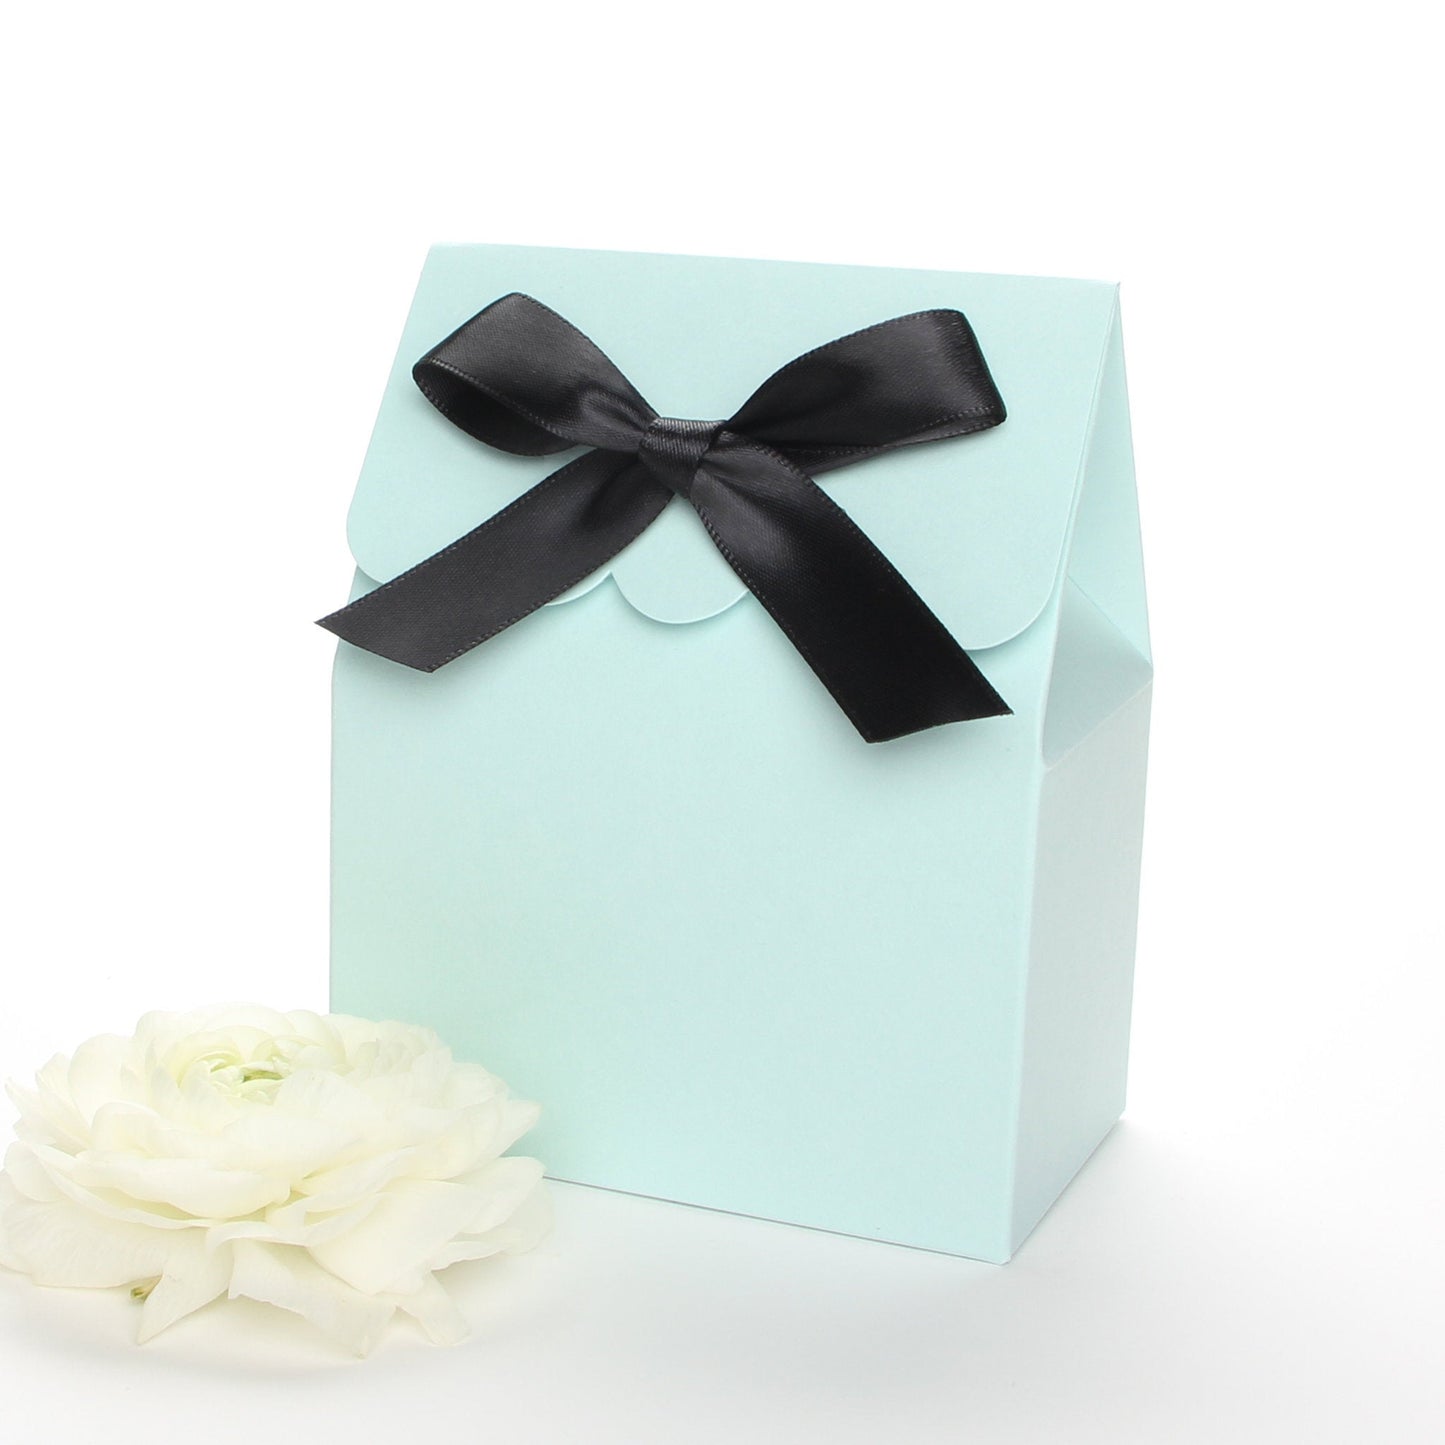 Lux Party’s light blue favor box with a scalloped edge and a black satin bow next to white ranunculus flowers.